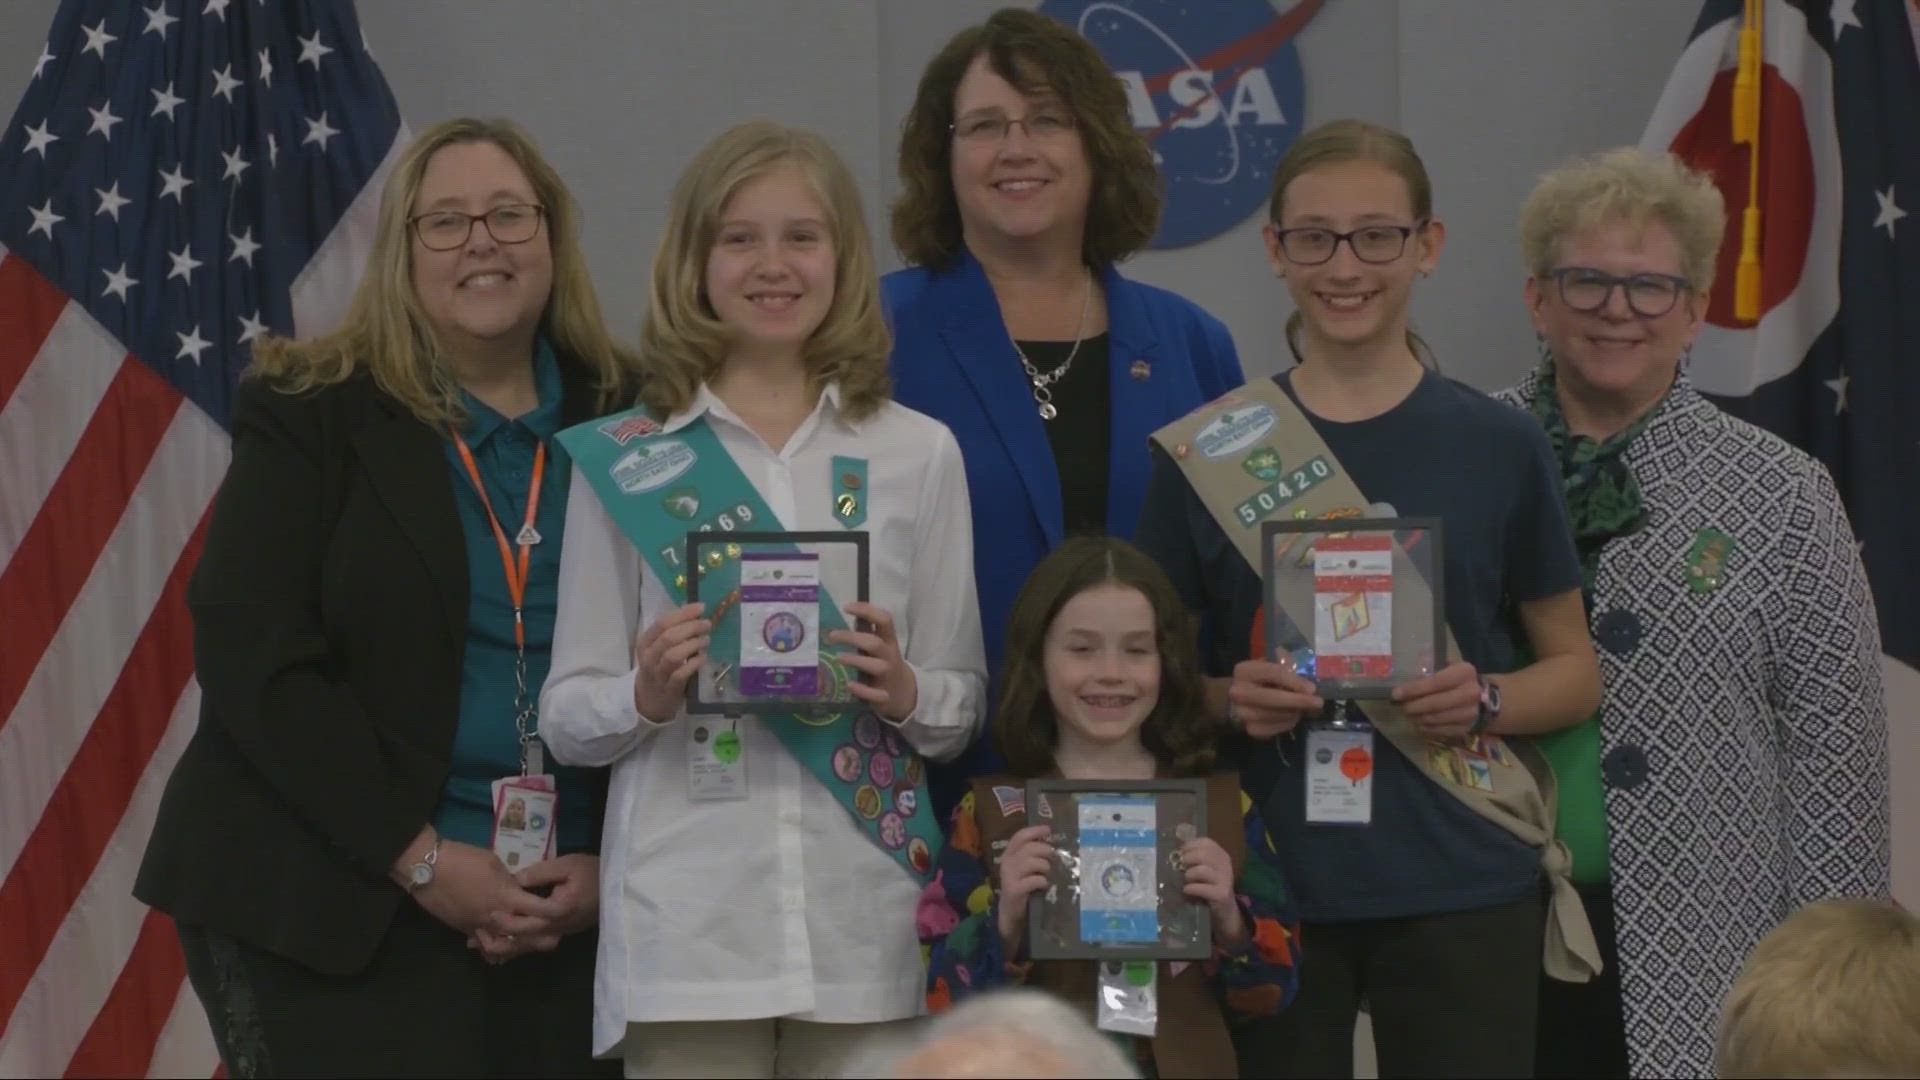 Each girl had the "write stuff" for a national essay competition sponsored by NASA and Girl Scouts of the USA.